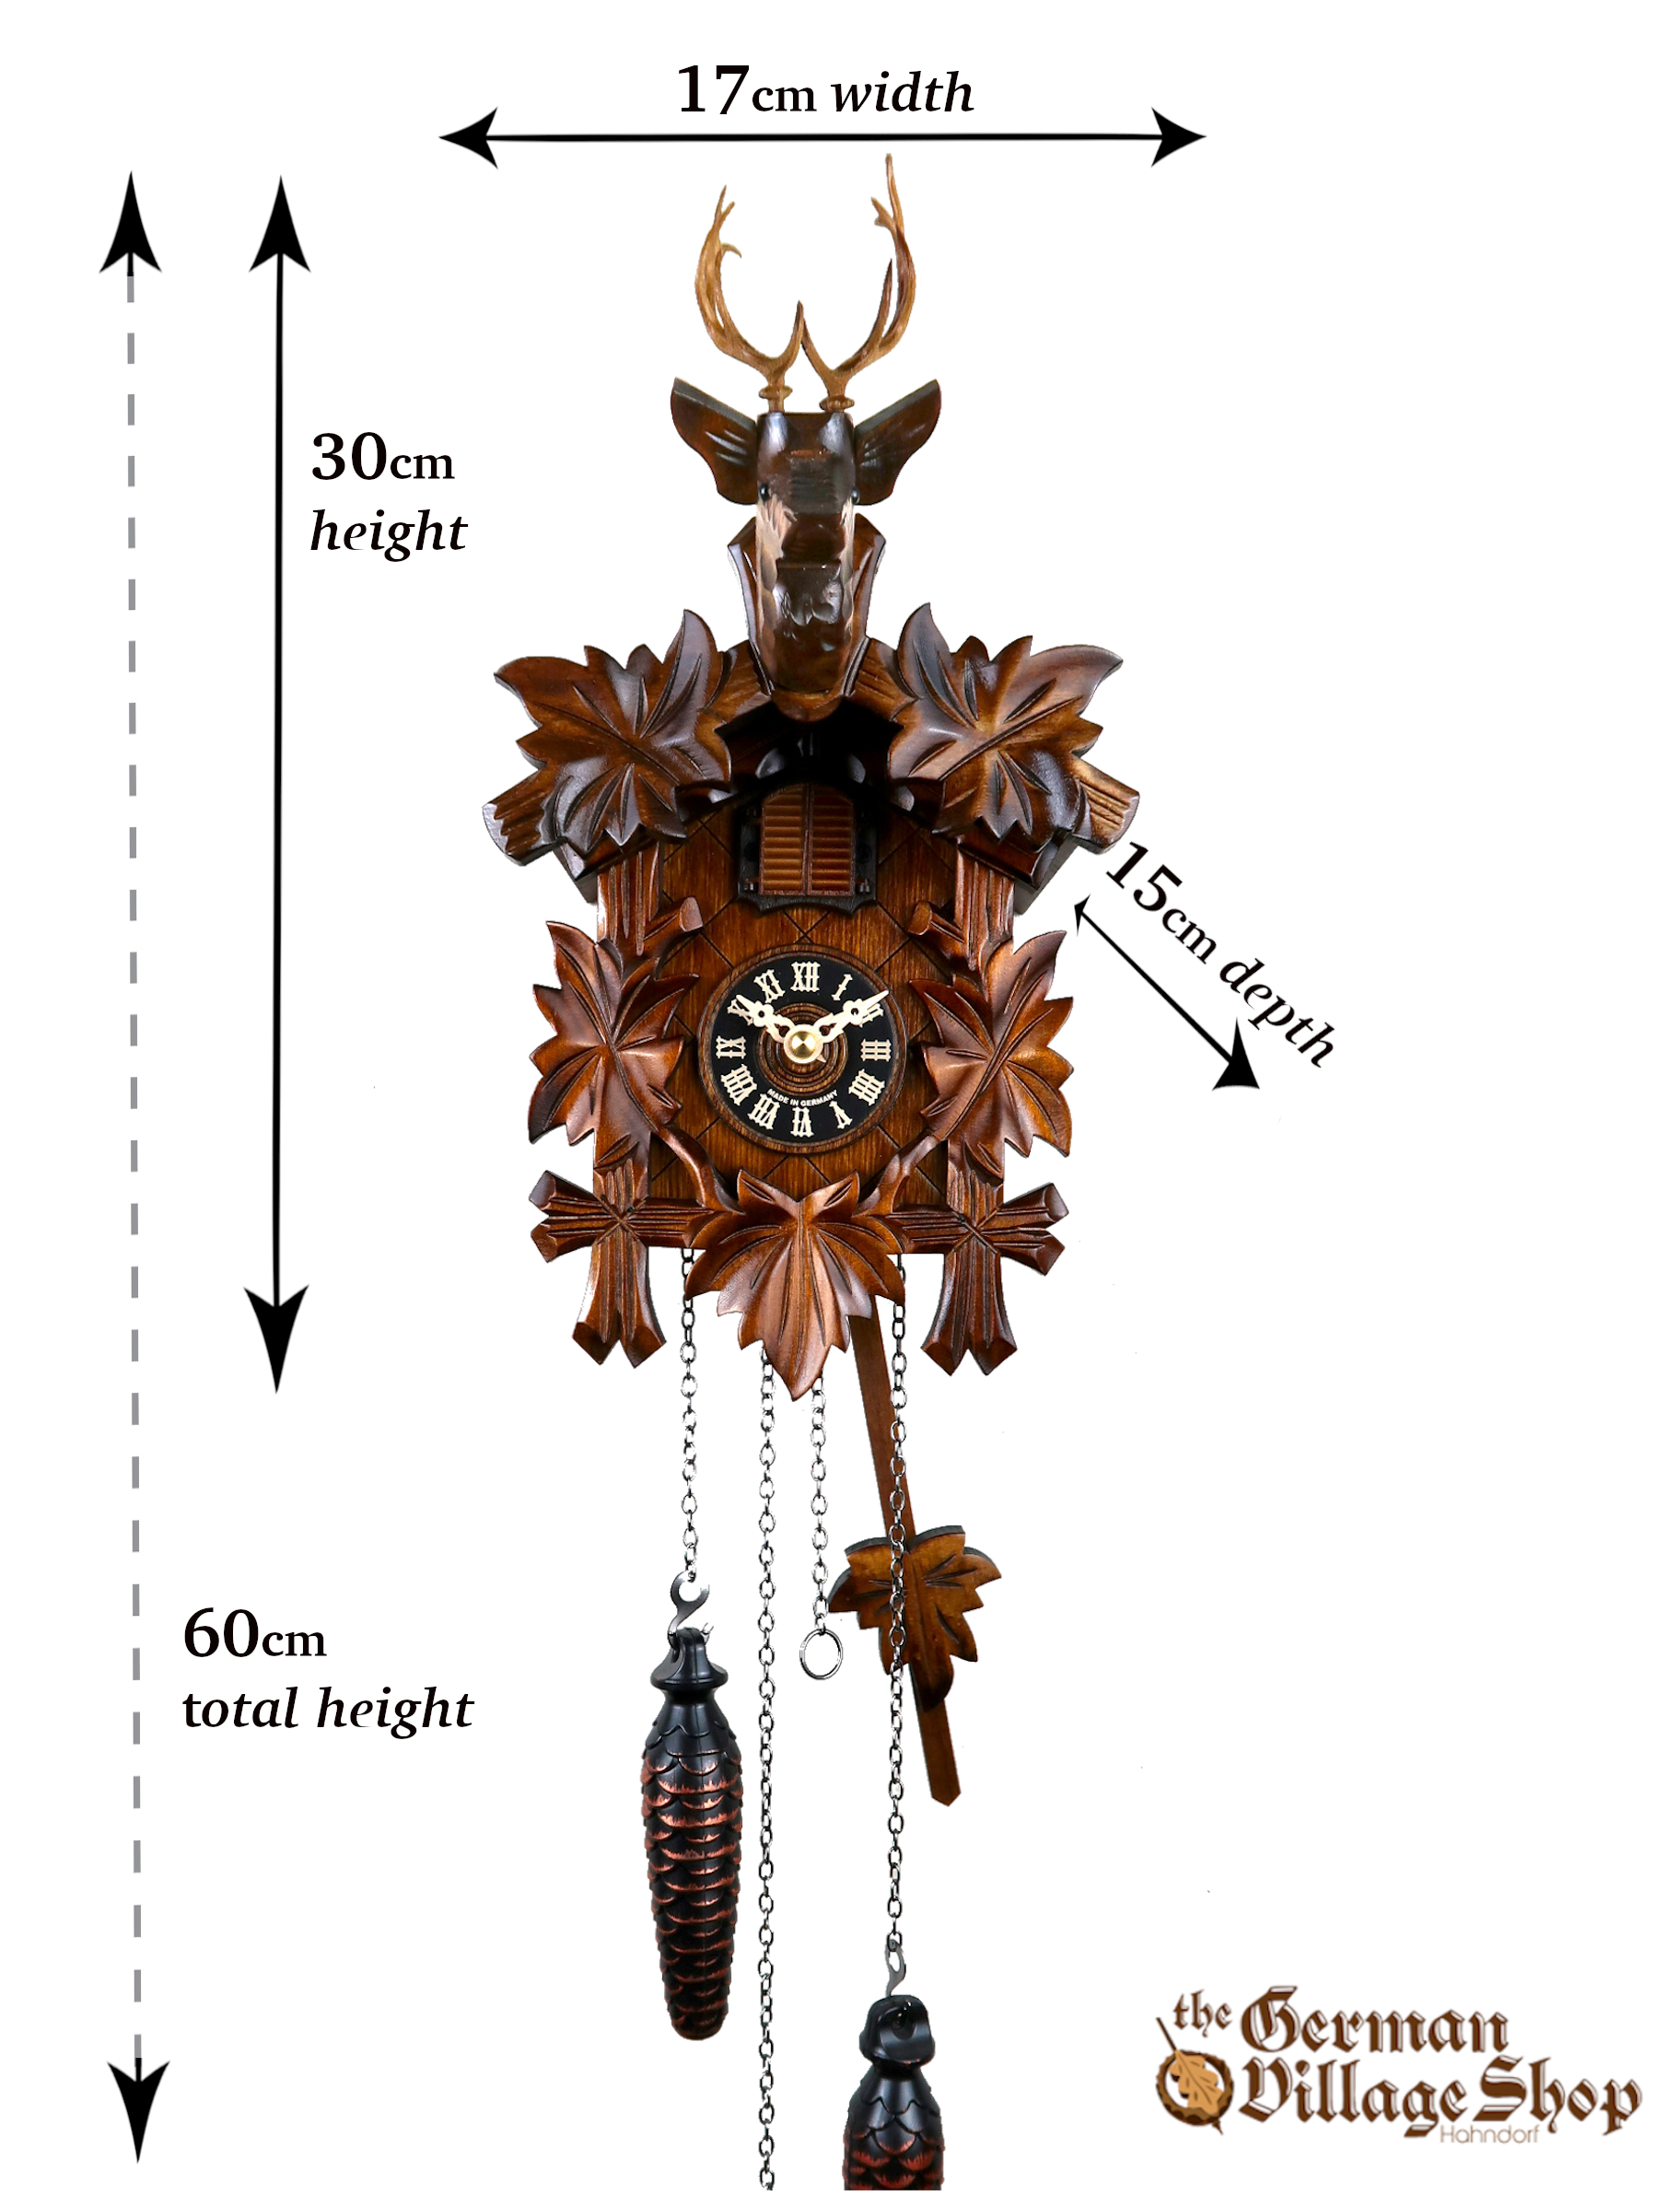 German Cuckoo Clock imported and sold in Australia